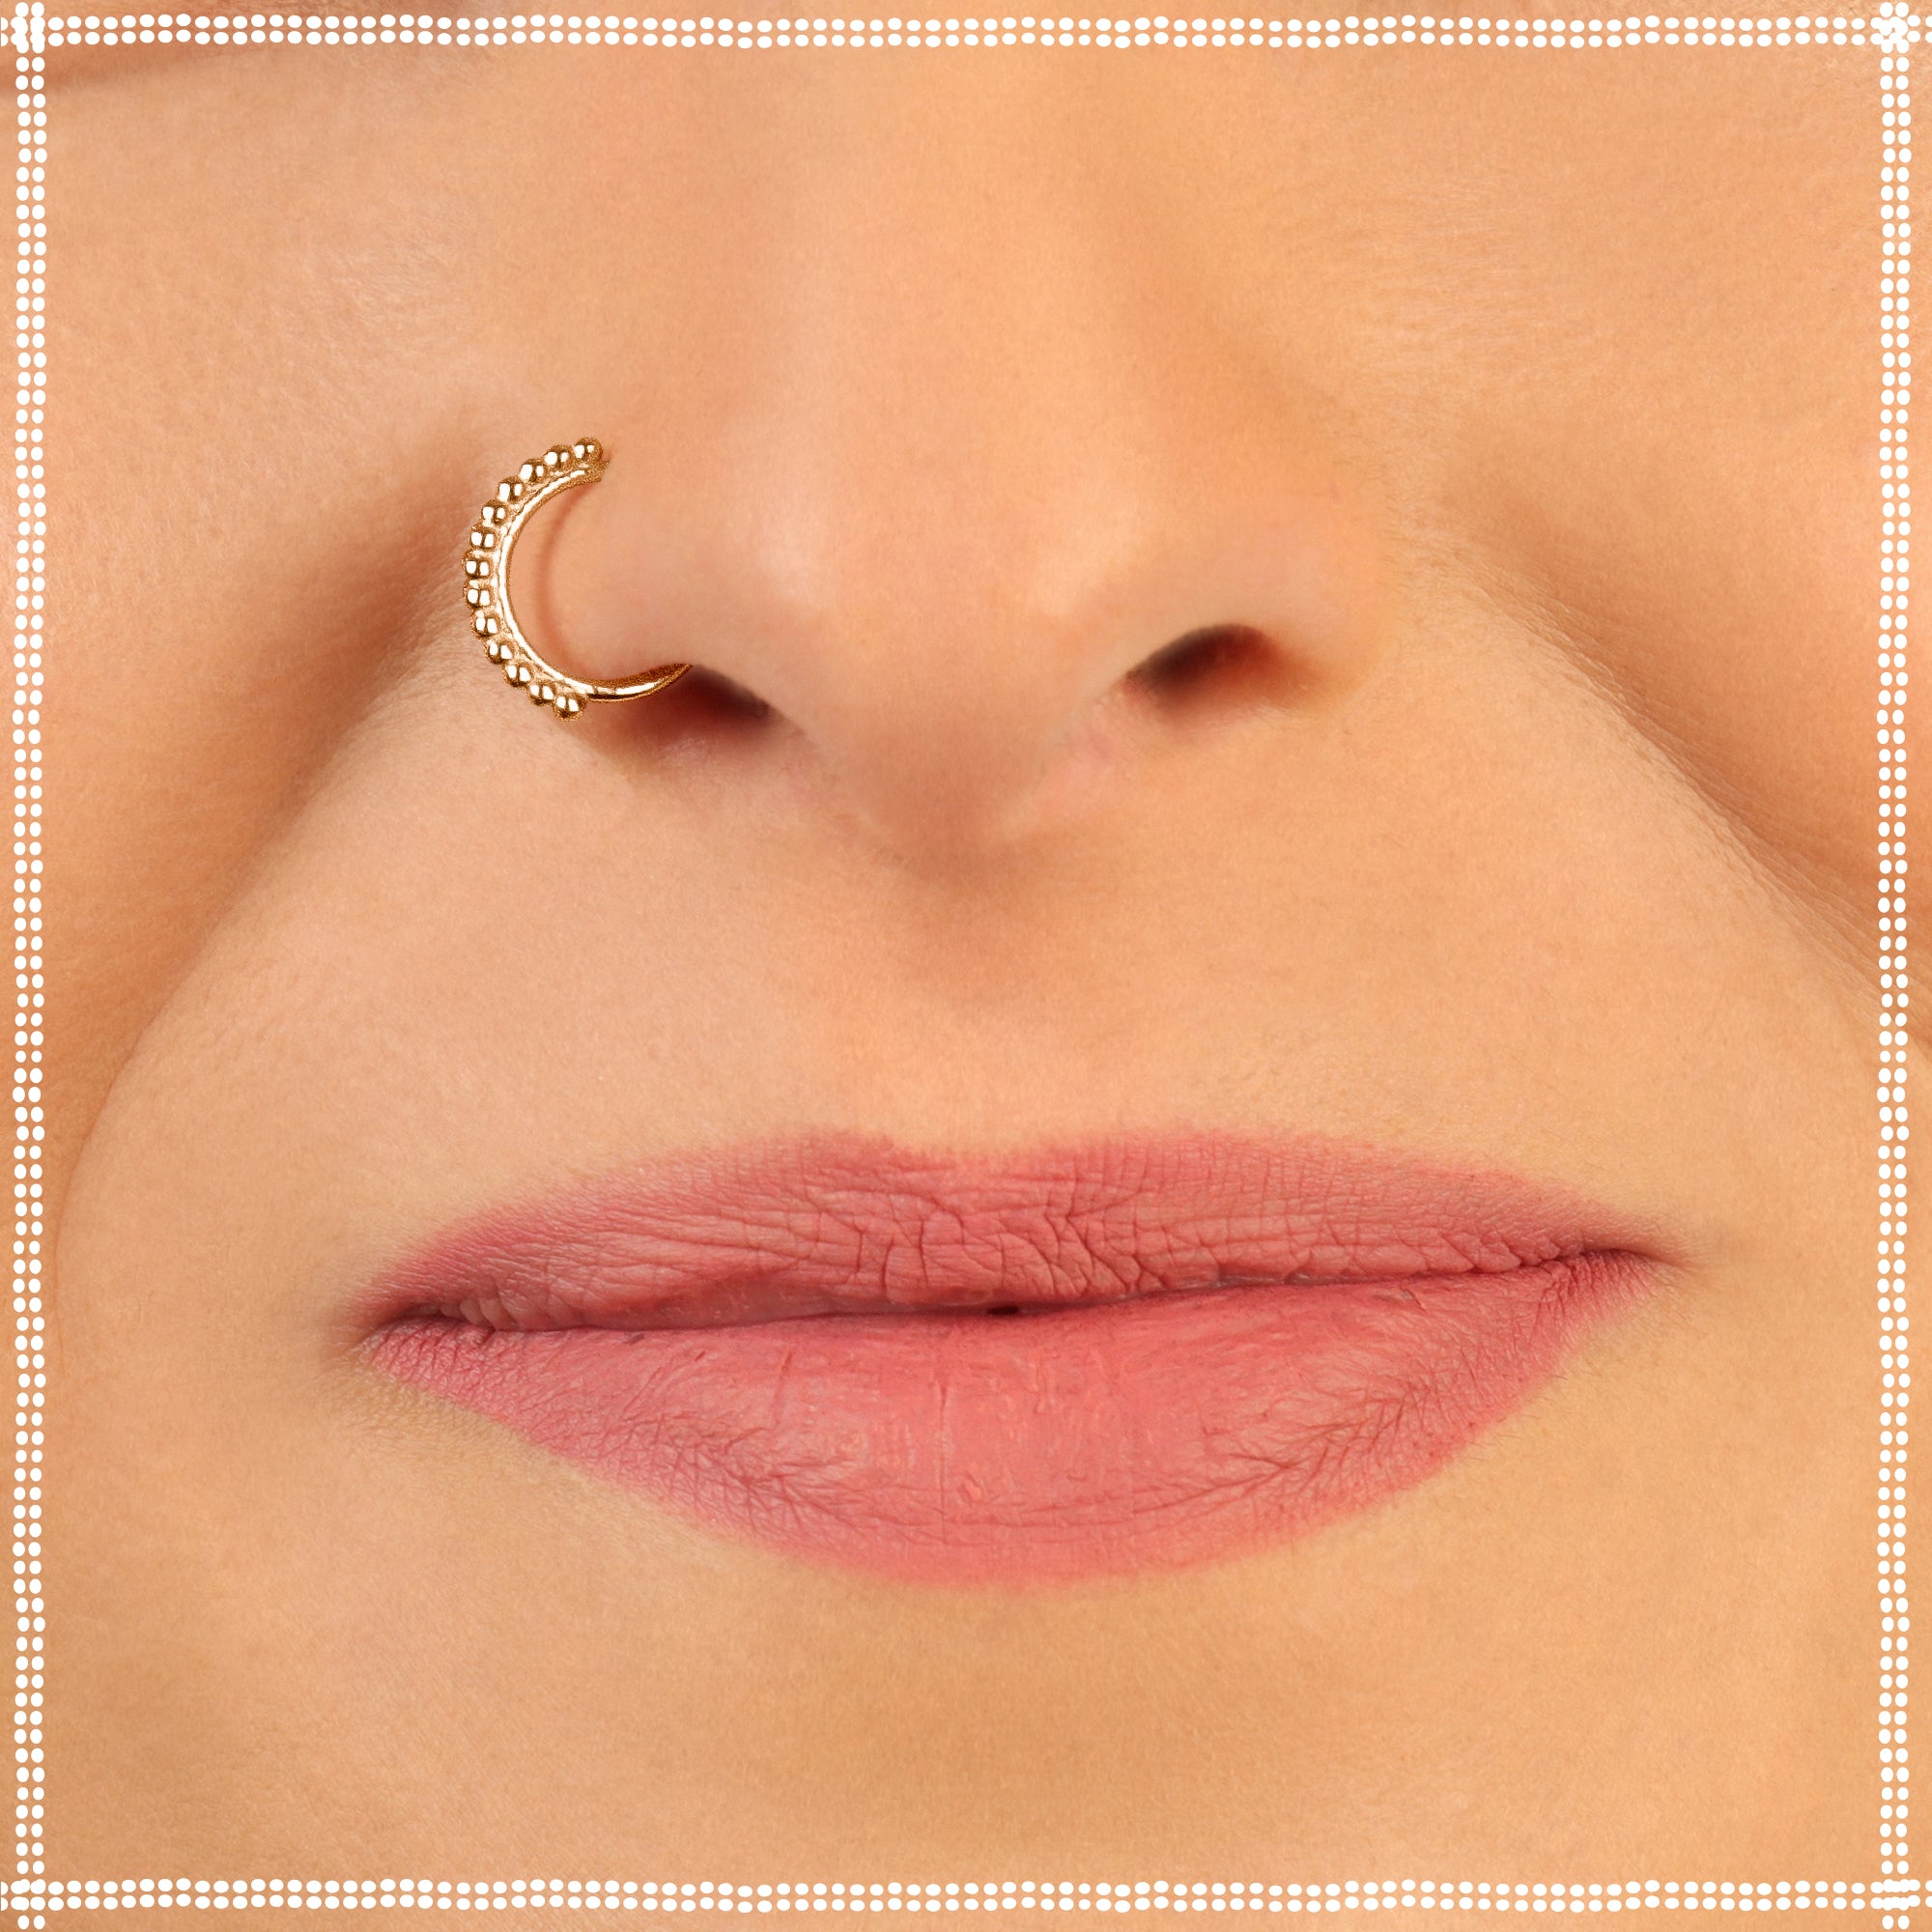 Amazon.com: Gold Beaded Nose Ring - Dainty 8mm Hoop 24 Gauge Gold Beads  Piercing – Snug 14K Gold Filled Nose Piercings – Body Jewelry Piercing  Hoops – Gift Ready Purchase : Handmade Products